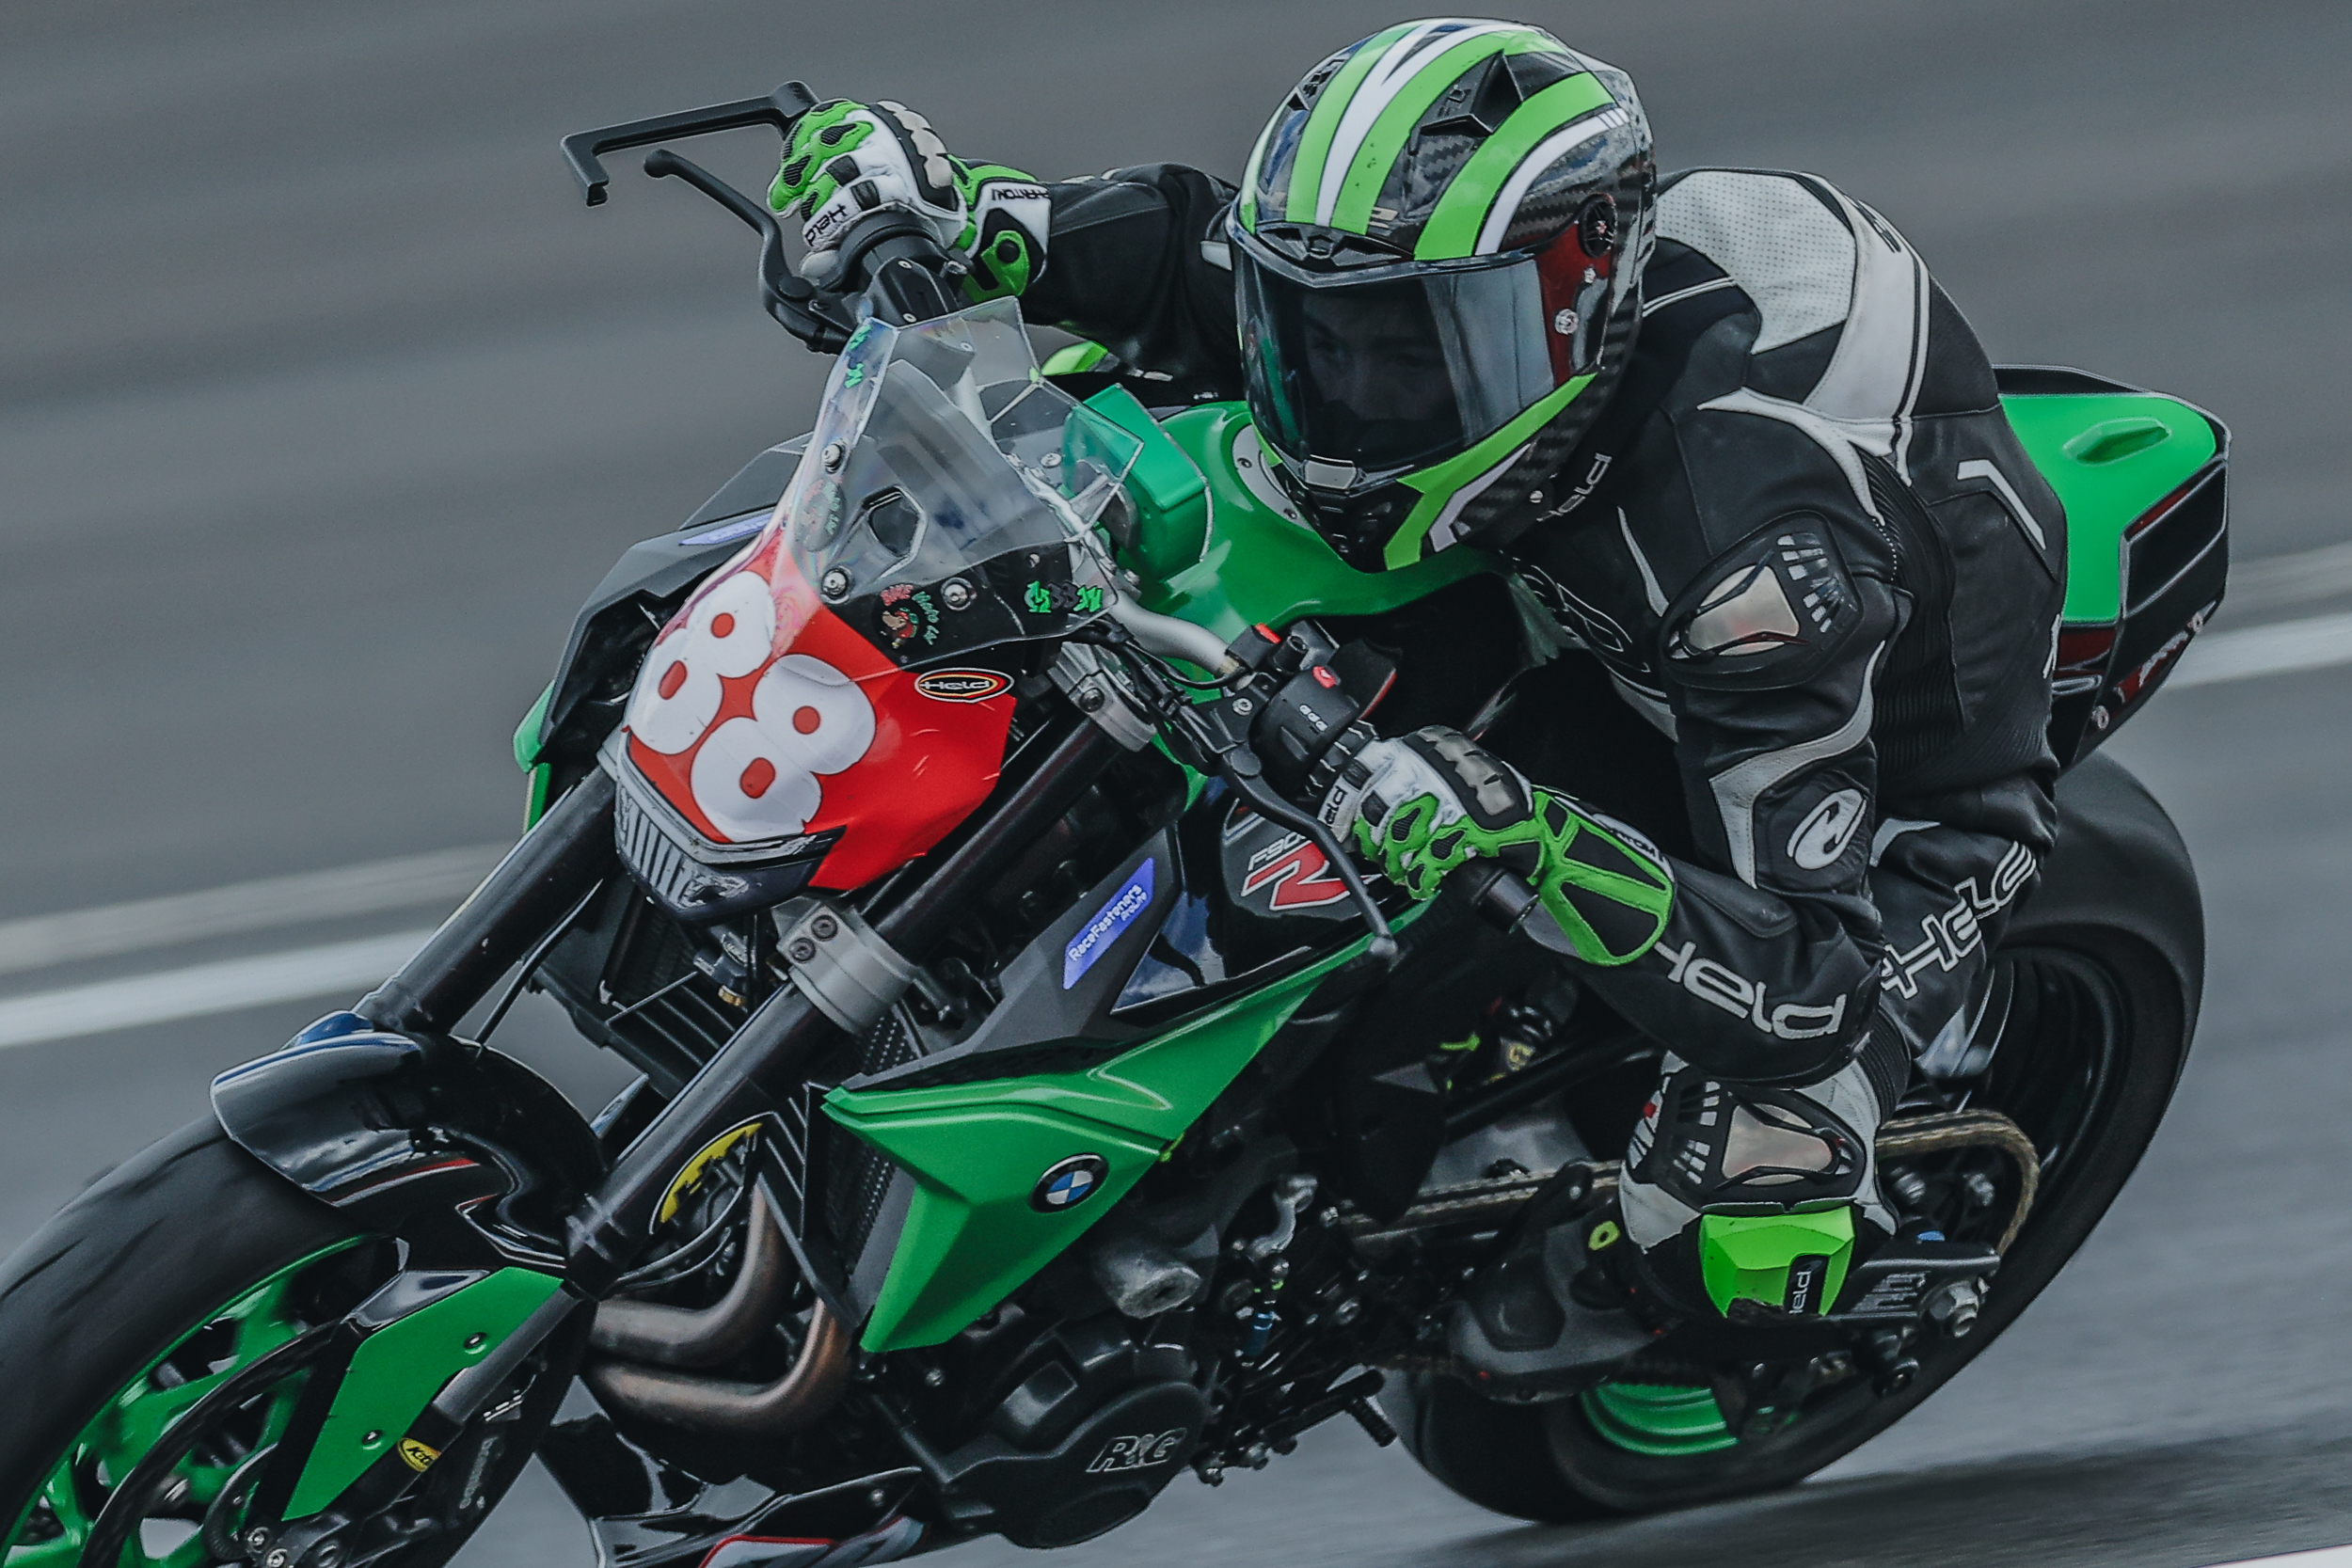 British Superbike Championship And Support Classes Deliver Intense Action In Season Opening Day At Circuito De Navarra